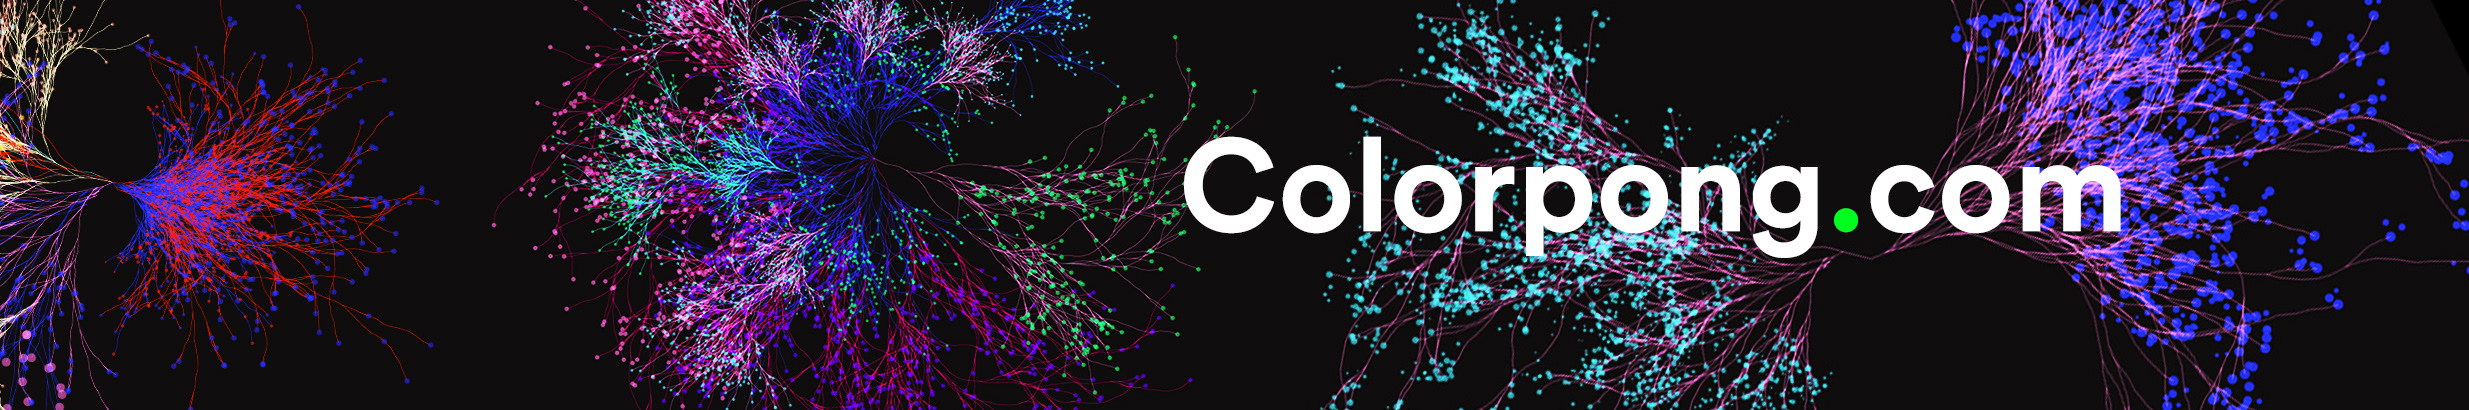 Colorpong .com's profile banner